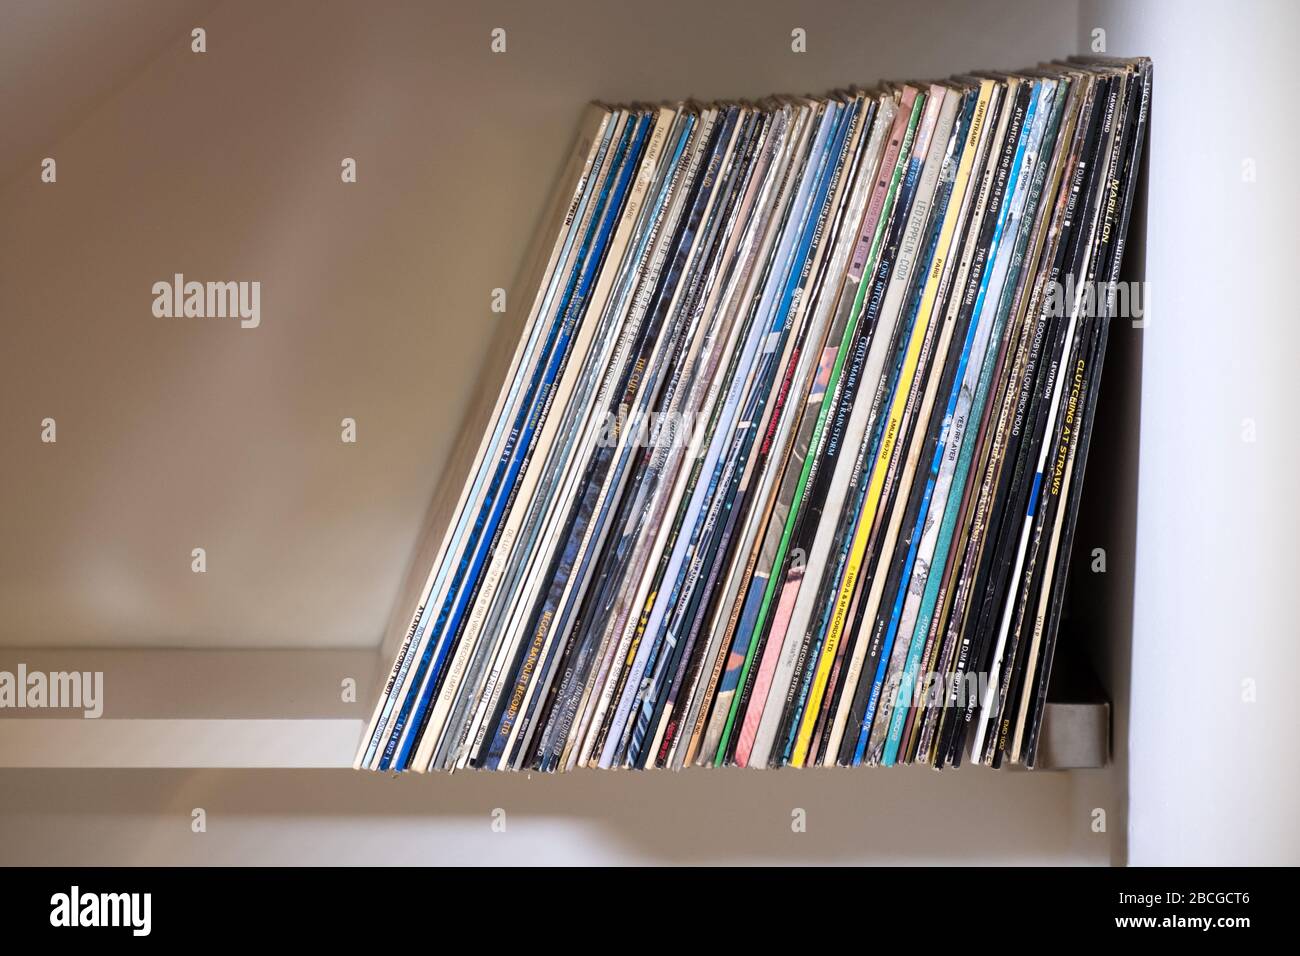 A row of record albums, or vinyl LP's, stored, standing upright, on a shelf Stock Photo